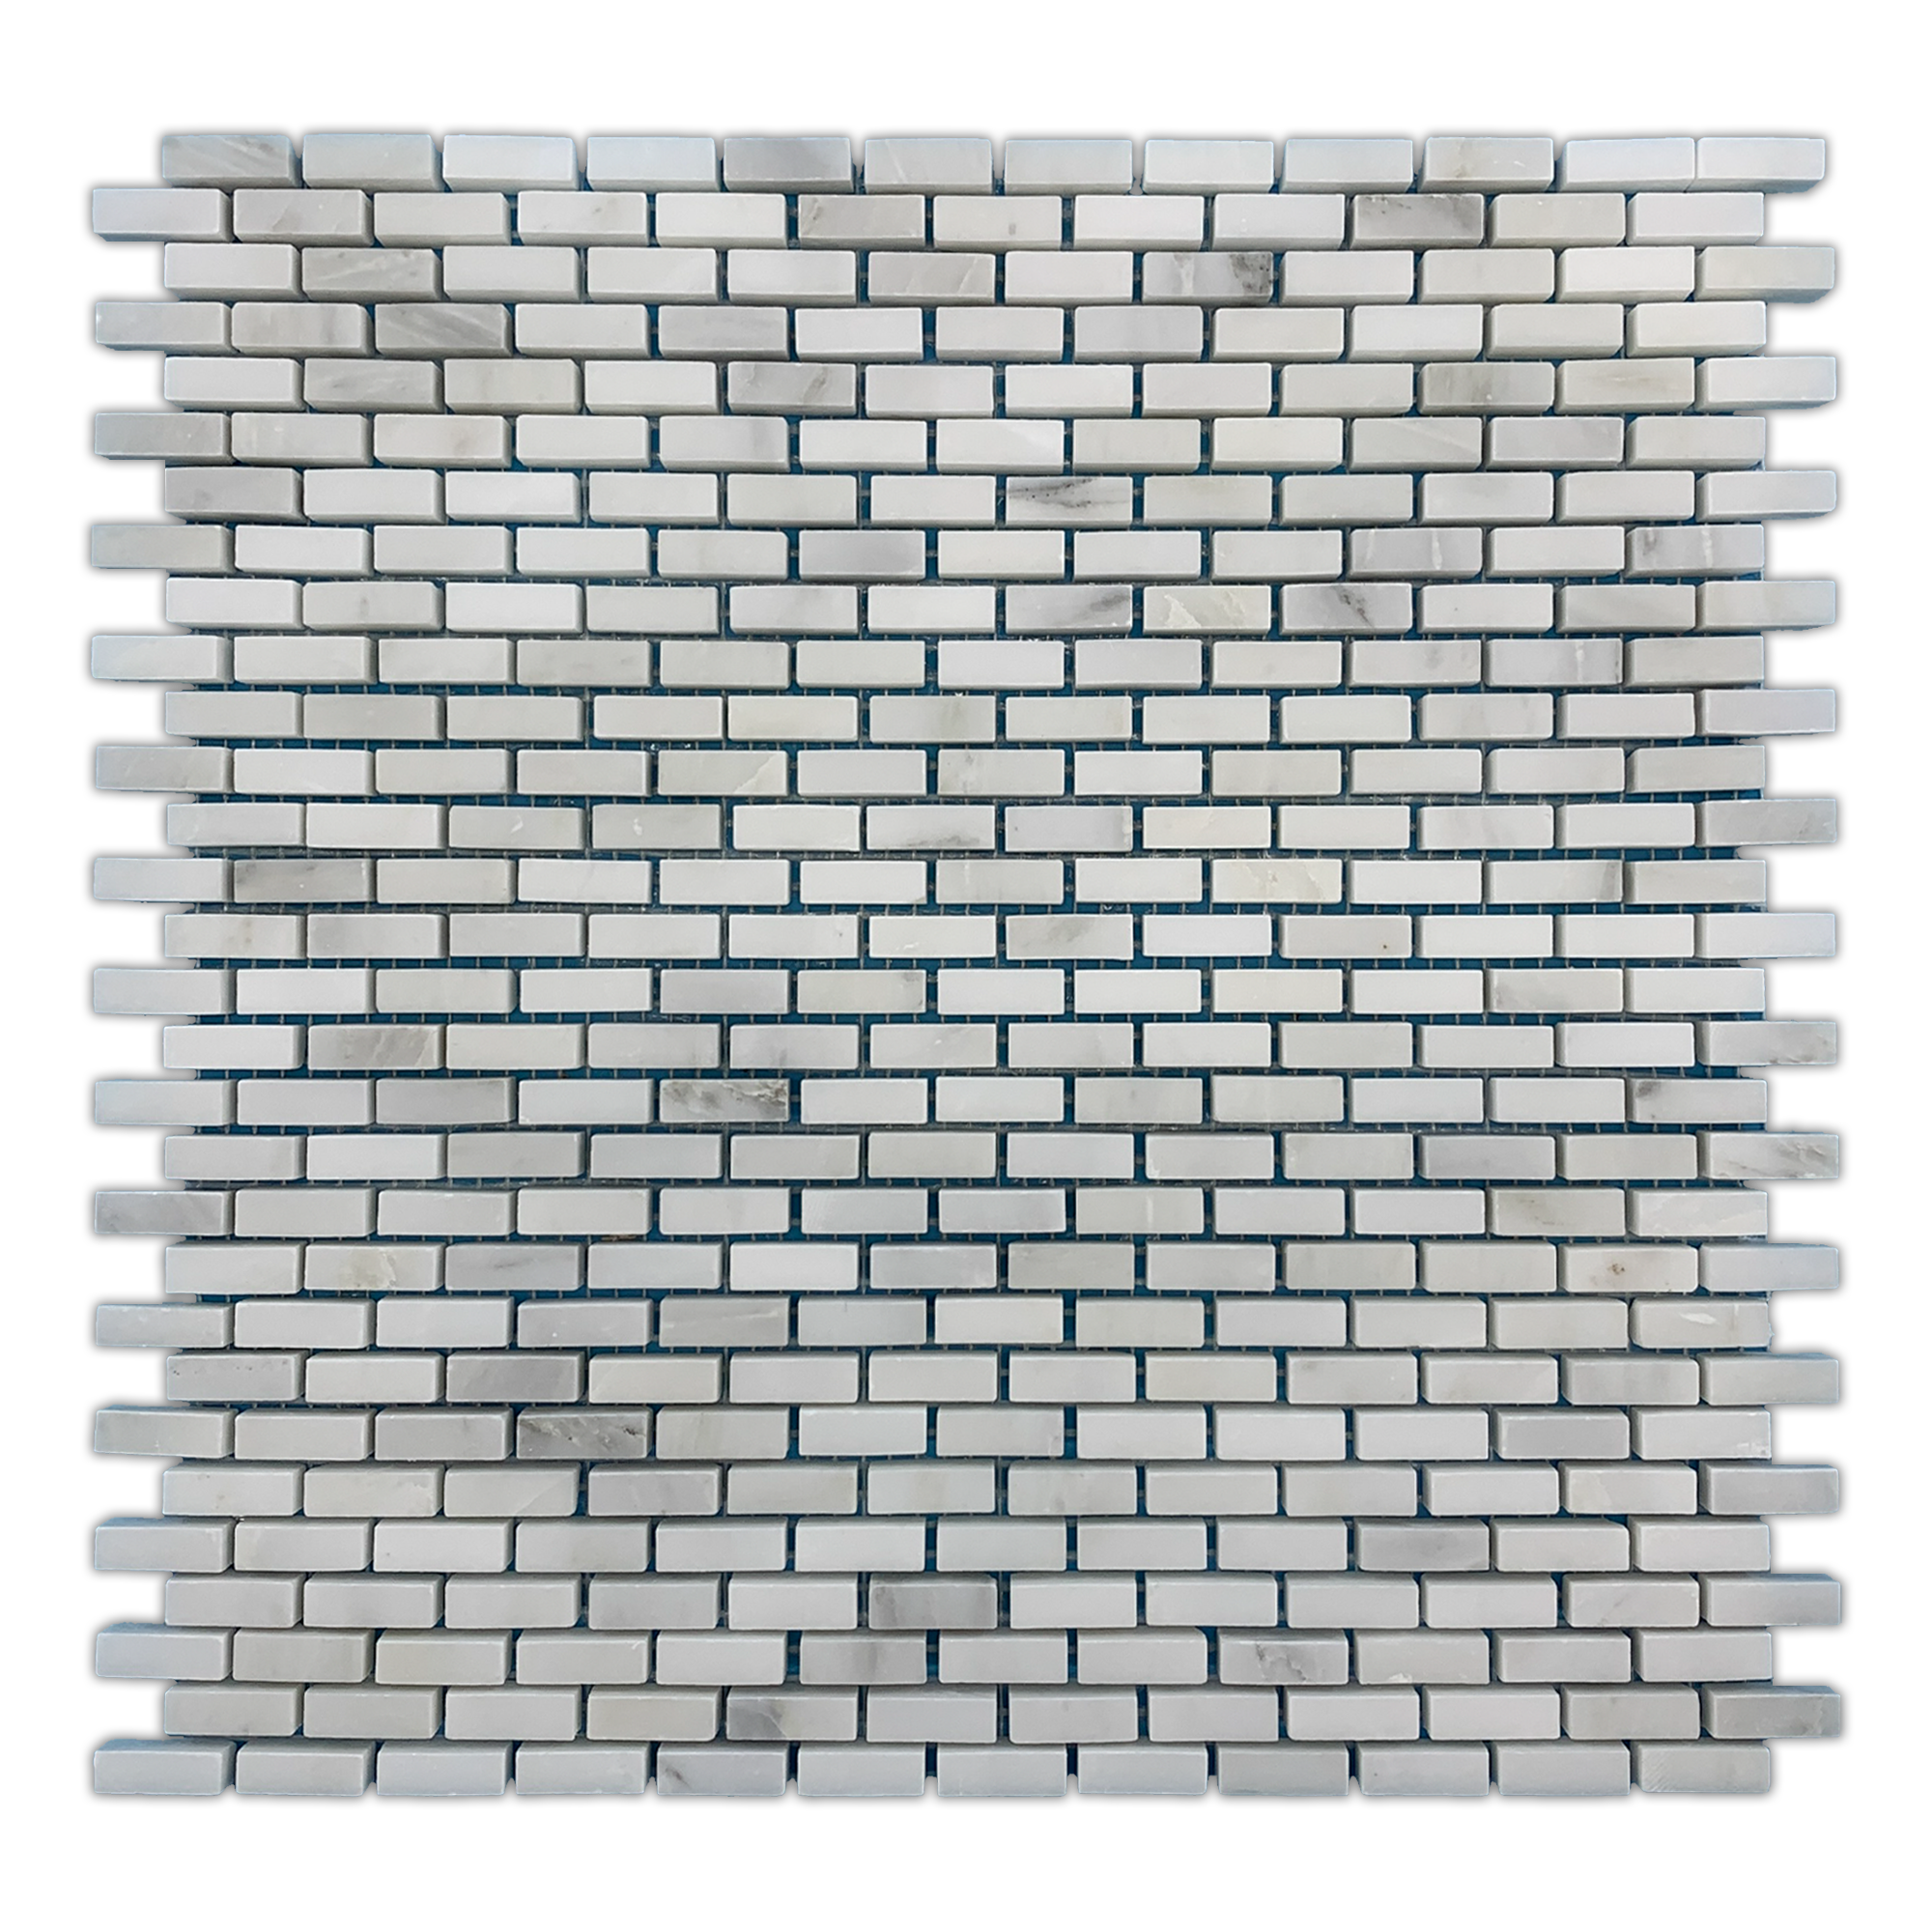 Elon Pearl White Marble Staggered Joint Field Mosaic 11.75x11.8125x0.375 Honed - Surface Group Online Tile Store